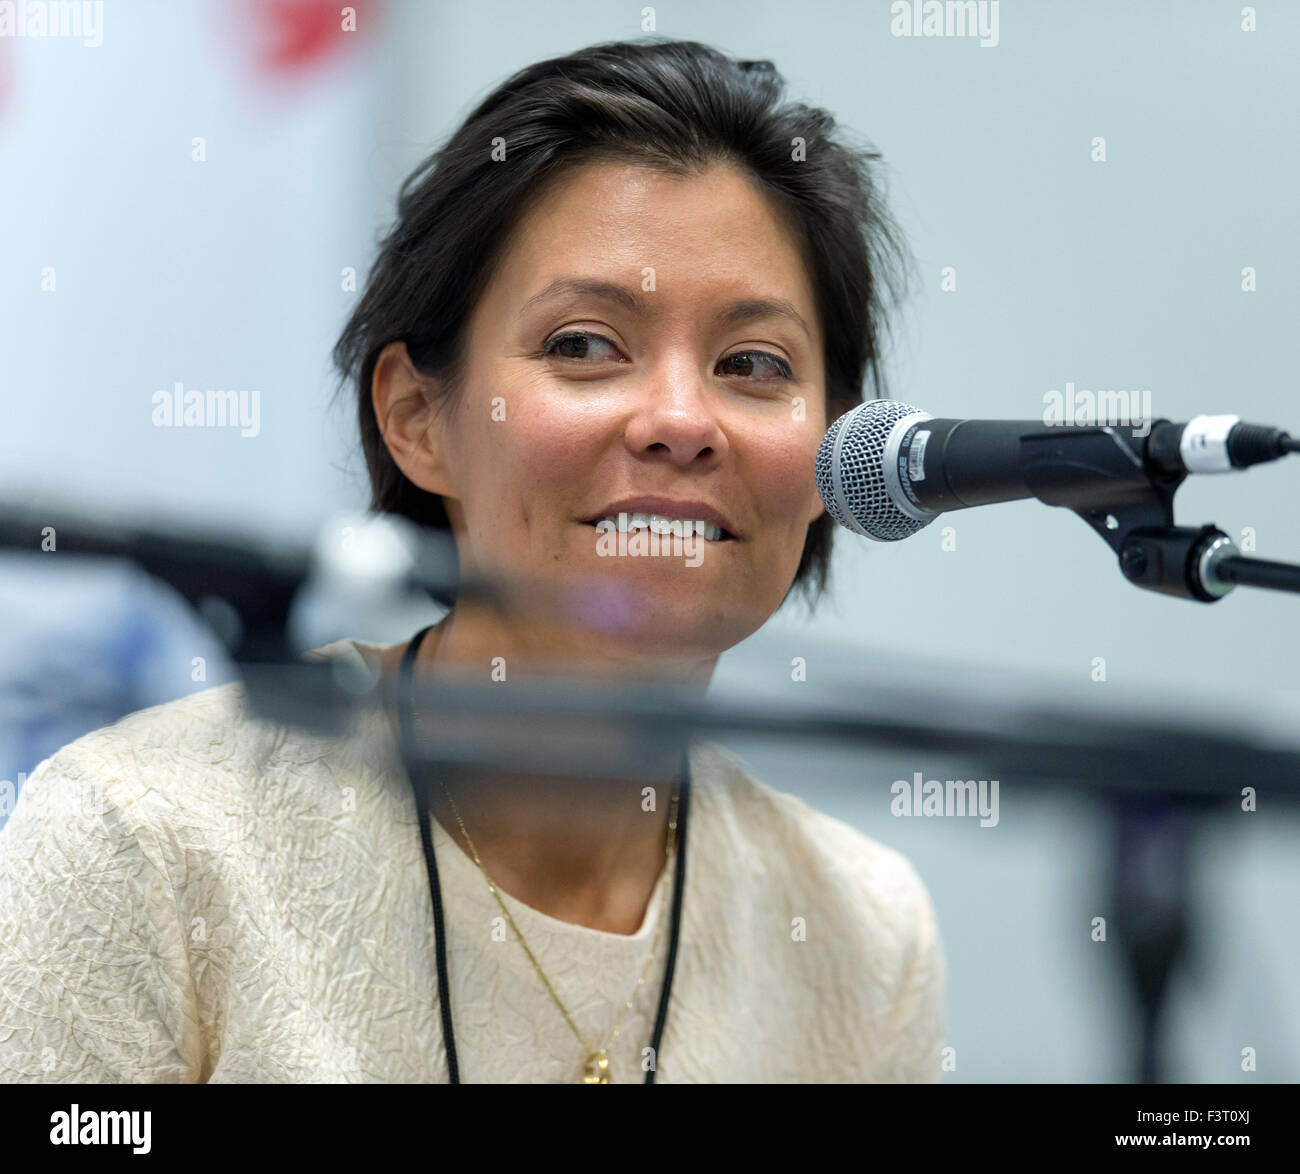 MSNBC Host Alex Wagner Is Ready for Anything